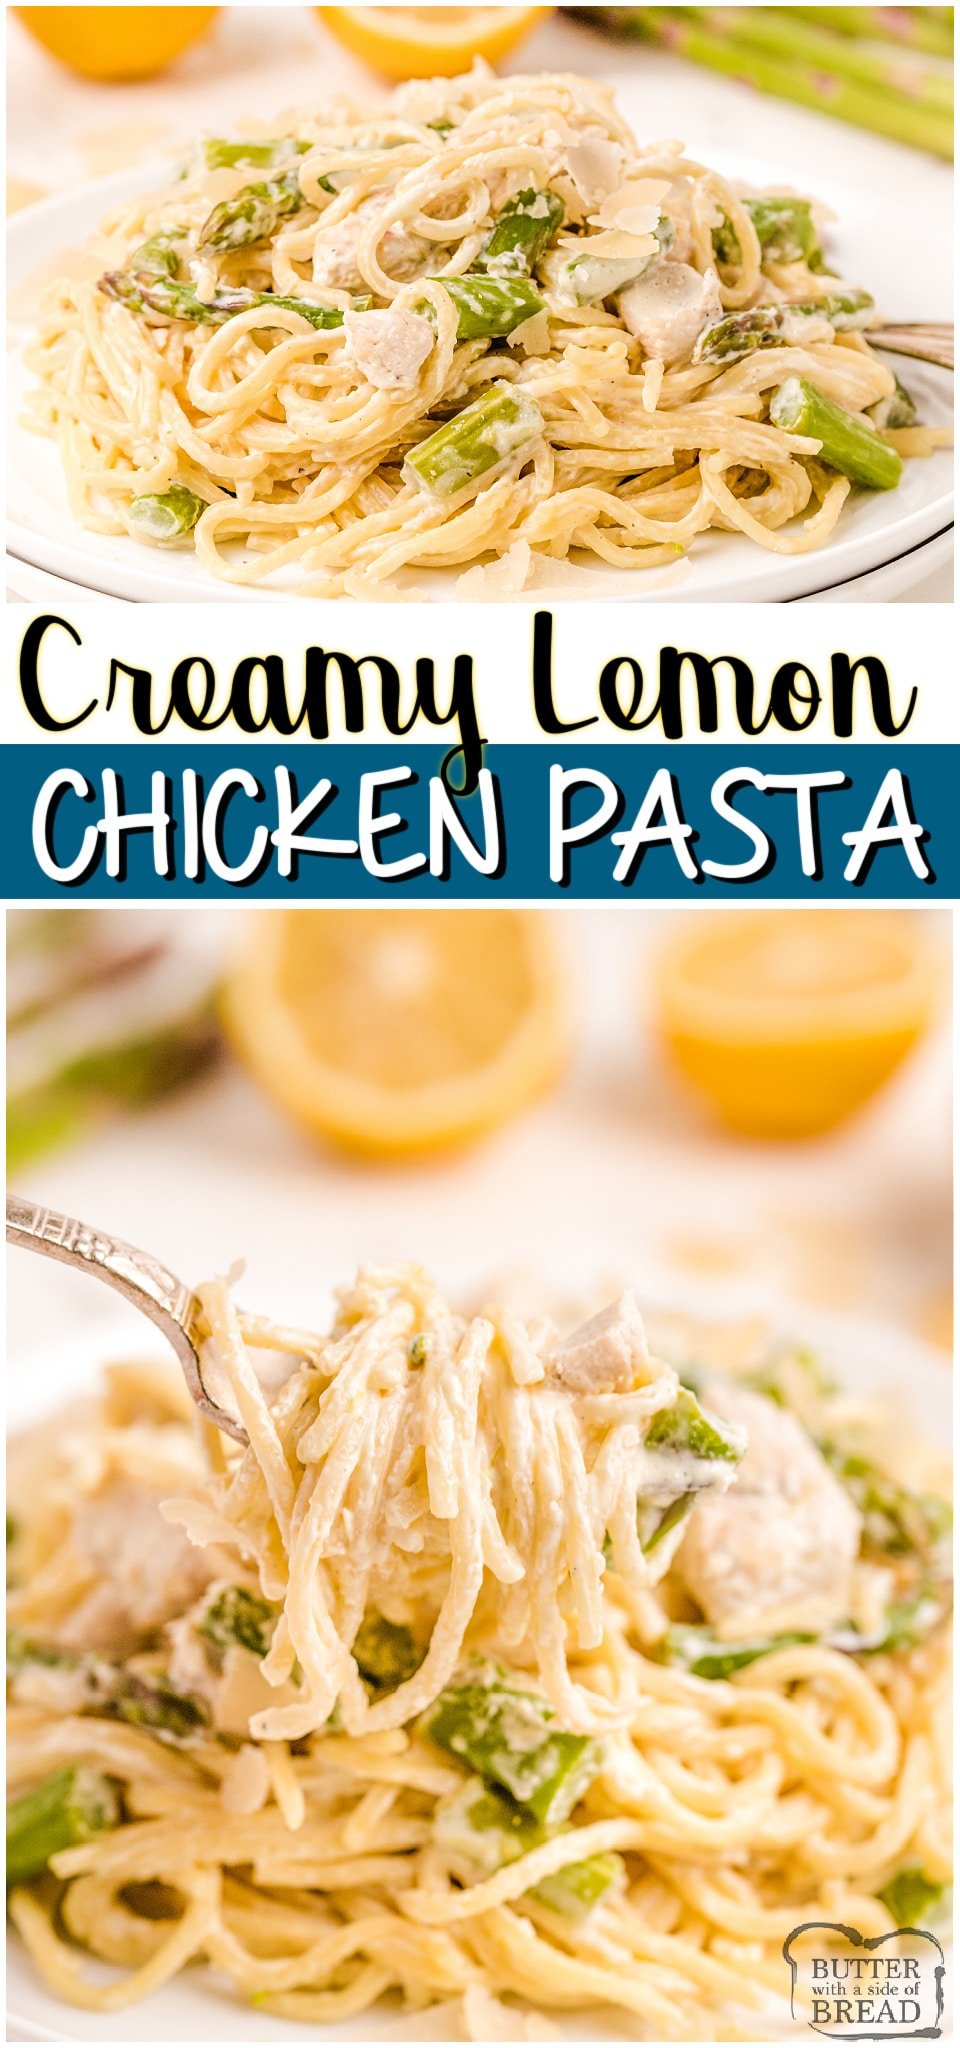 Creamy Lemon Chicken Pasta with Asparagus made easy with juicy chicken, fresh lemon and vegetables and a light, creamy sauce. Perfect weeknight lemon chicken dinner. #chicken #dinner #pasta #lemon #creamsauce #easyrecipe from BUTTER WITH A SIDE OF BREAD